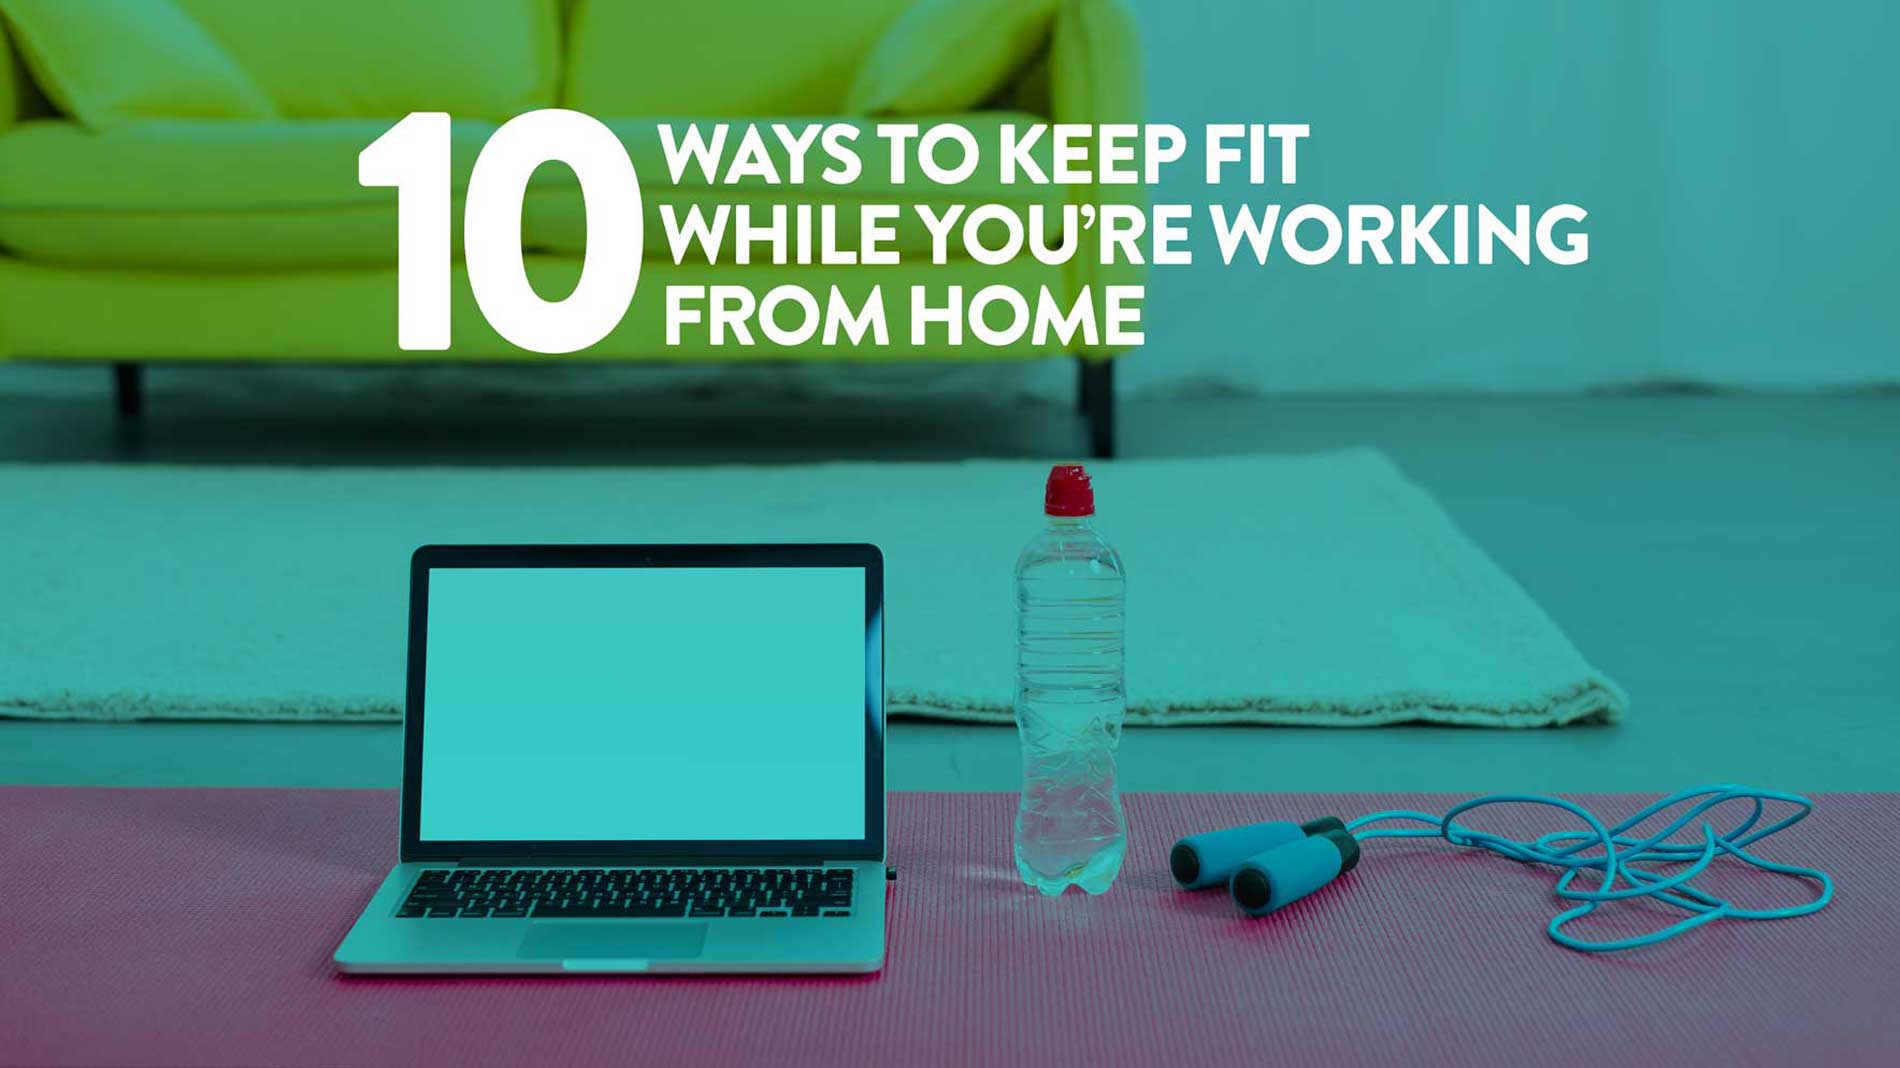 10 Ways to Keep Fit While You’re Working from Home